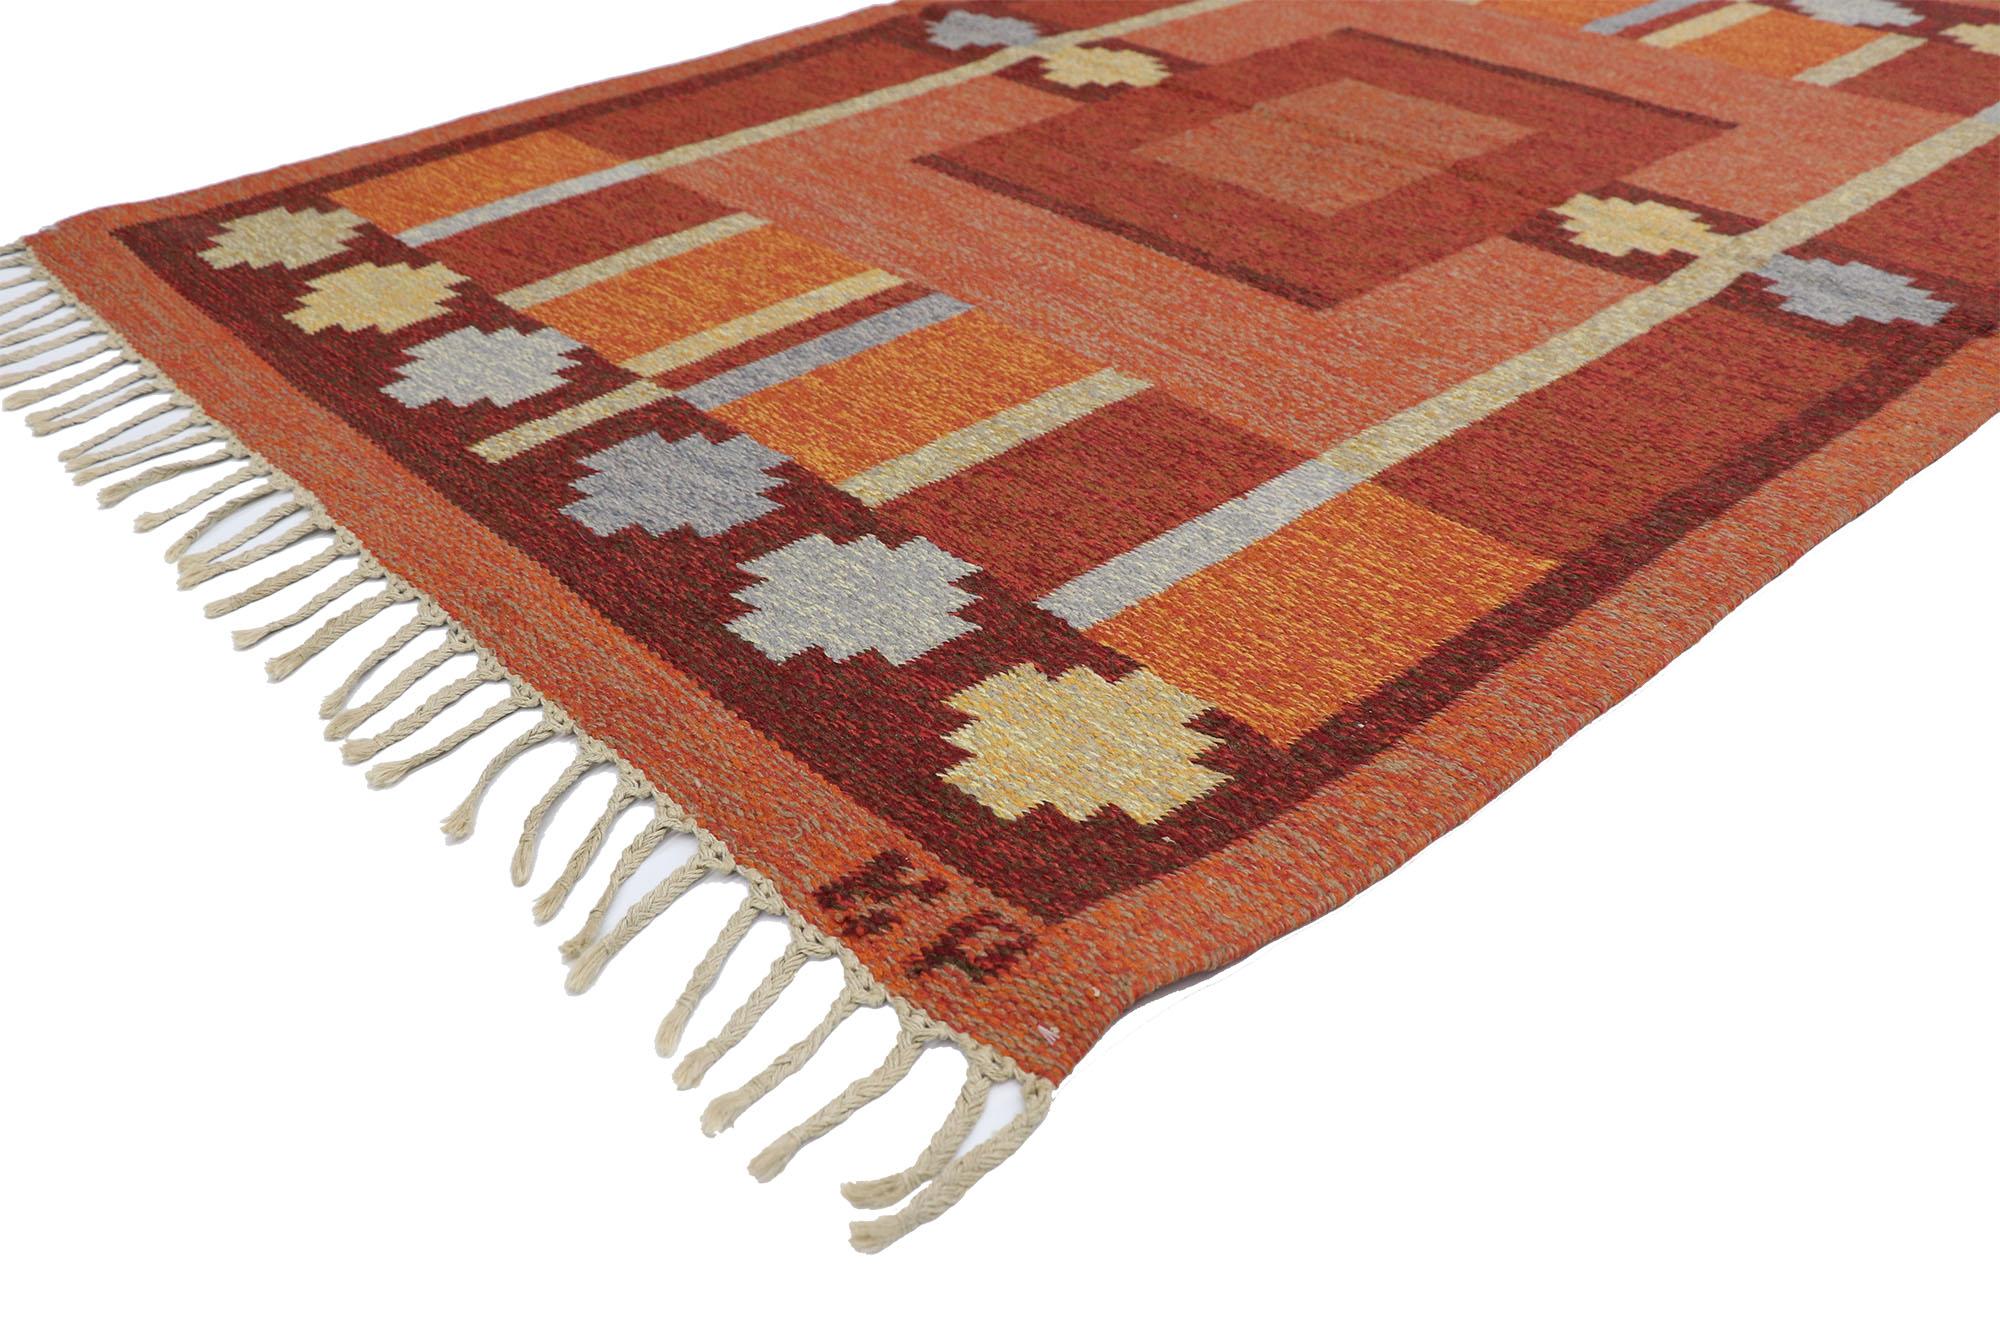 ​74942 Vintage Swedish Kilim Rug with Scandinavian Modern Style 04'04 x 06'08. ​​​This hand-woven wool vintage Swedish Rollakan Kilim rug was designed by master weaver, Kerstin Persson, in Scandinavia. It features a geometric pattern composed of